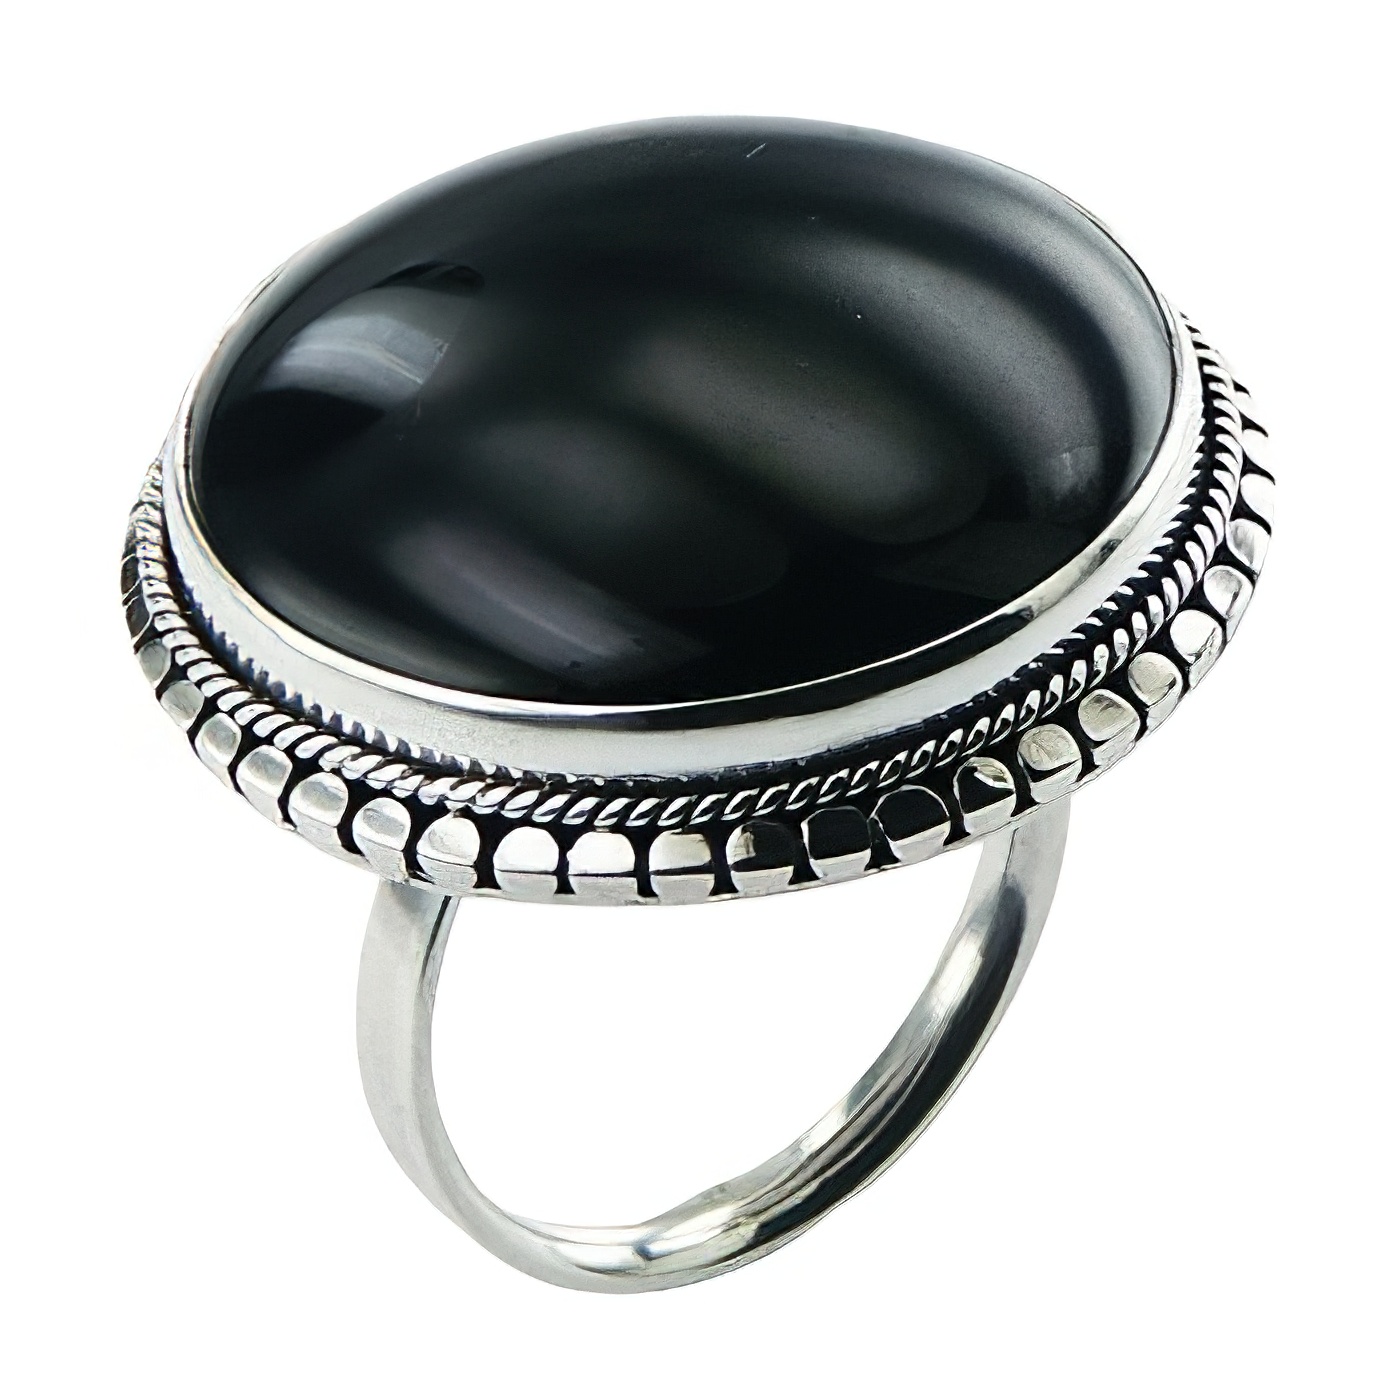 Black agate hand soldered silver ring 